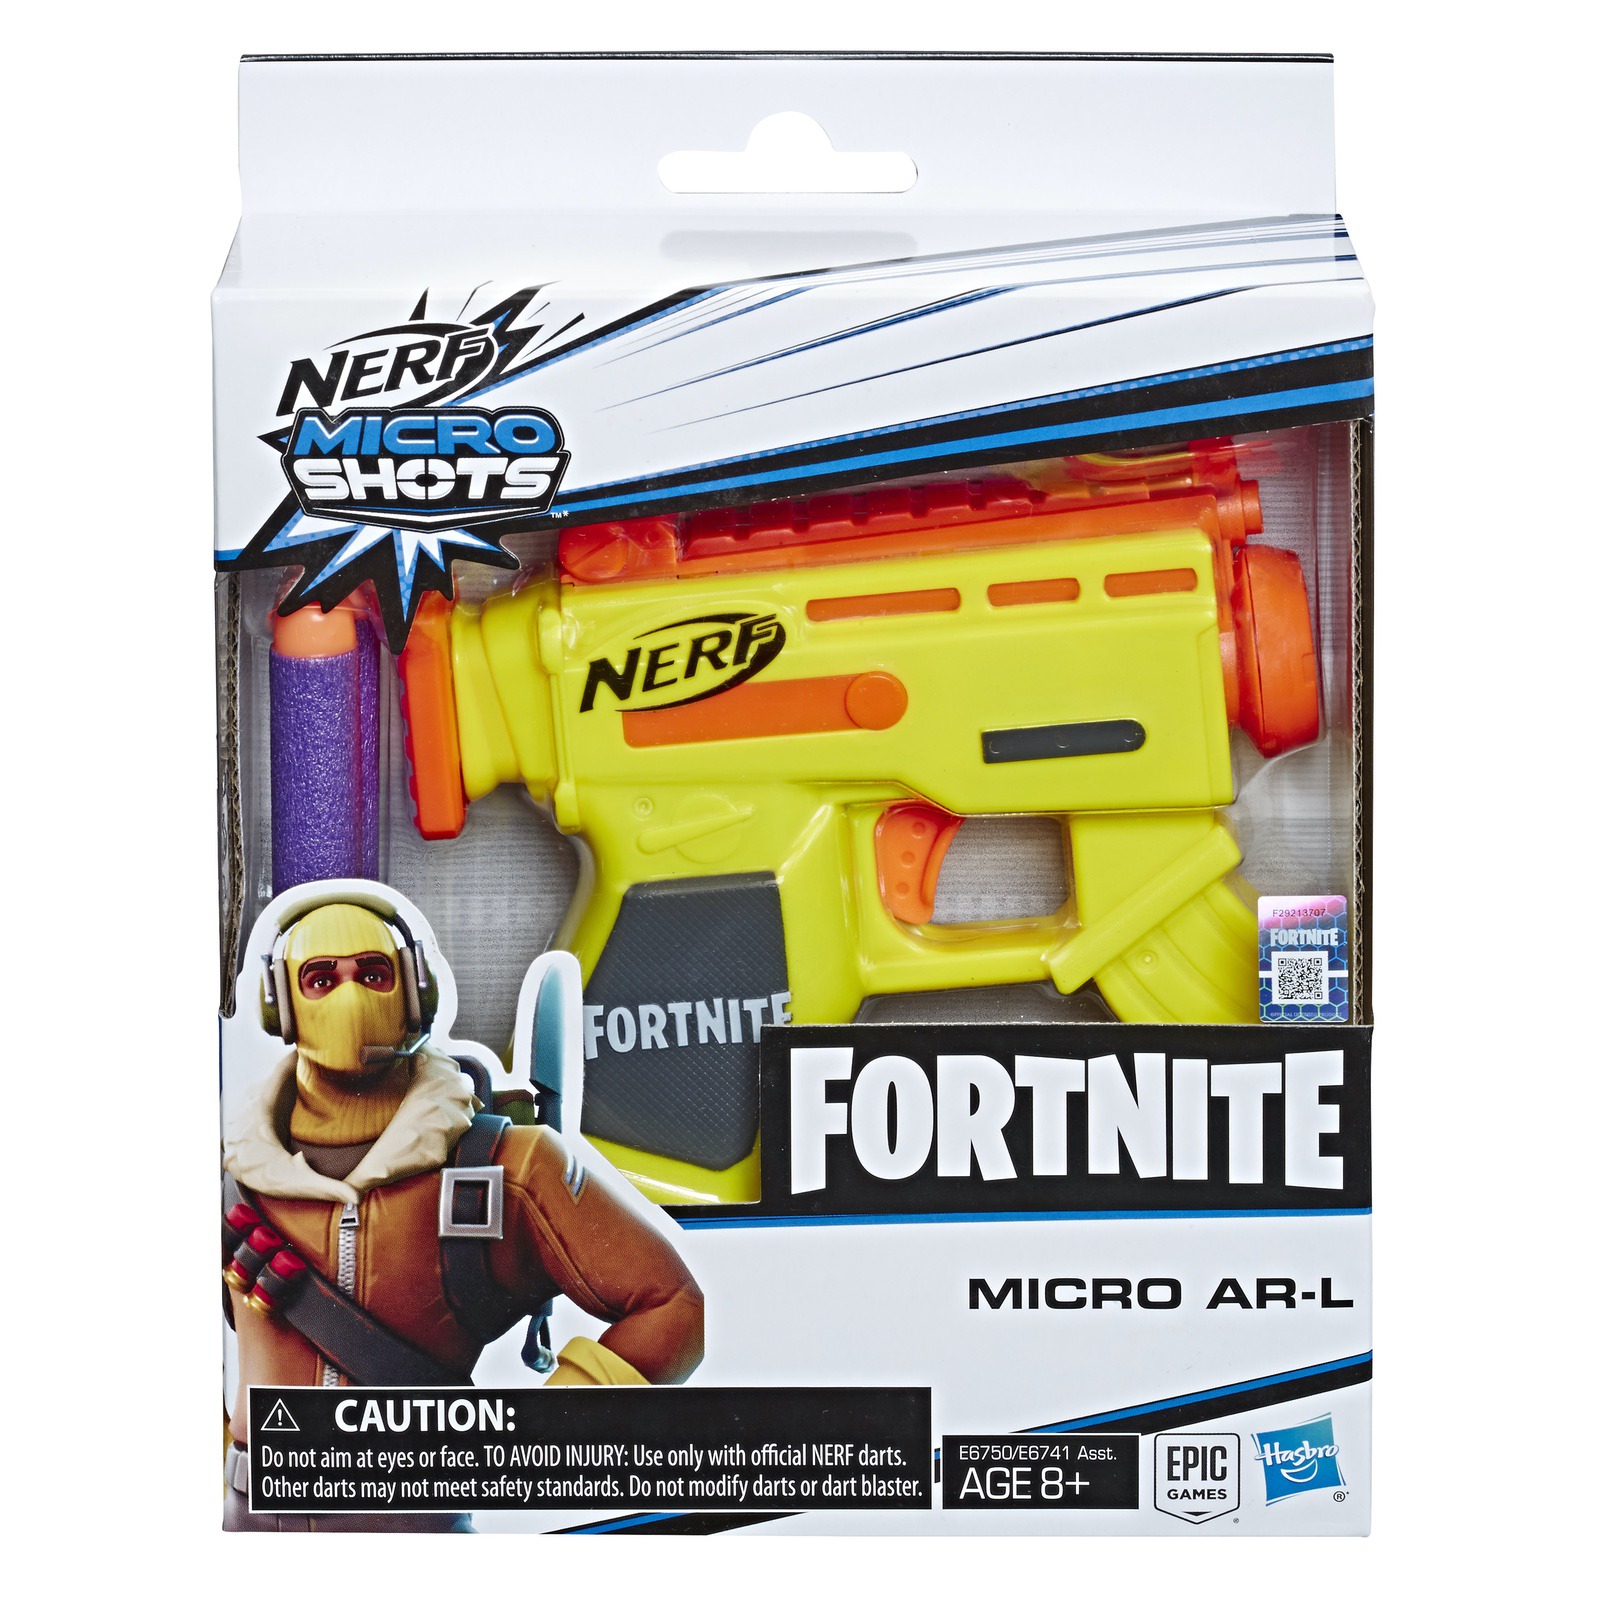 Hasbro's new Fortnite Nerf guns launch on March 22nd, with preorders  starting today - The Verge